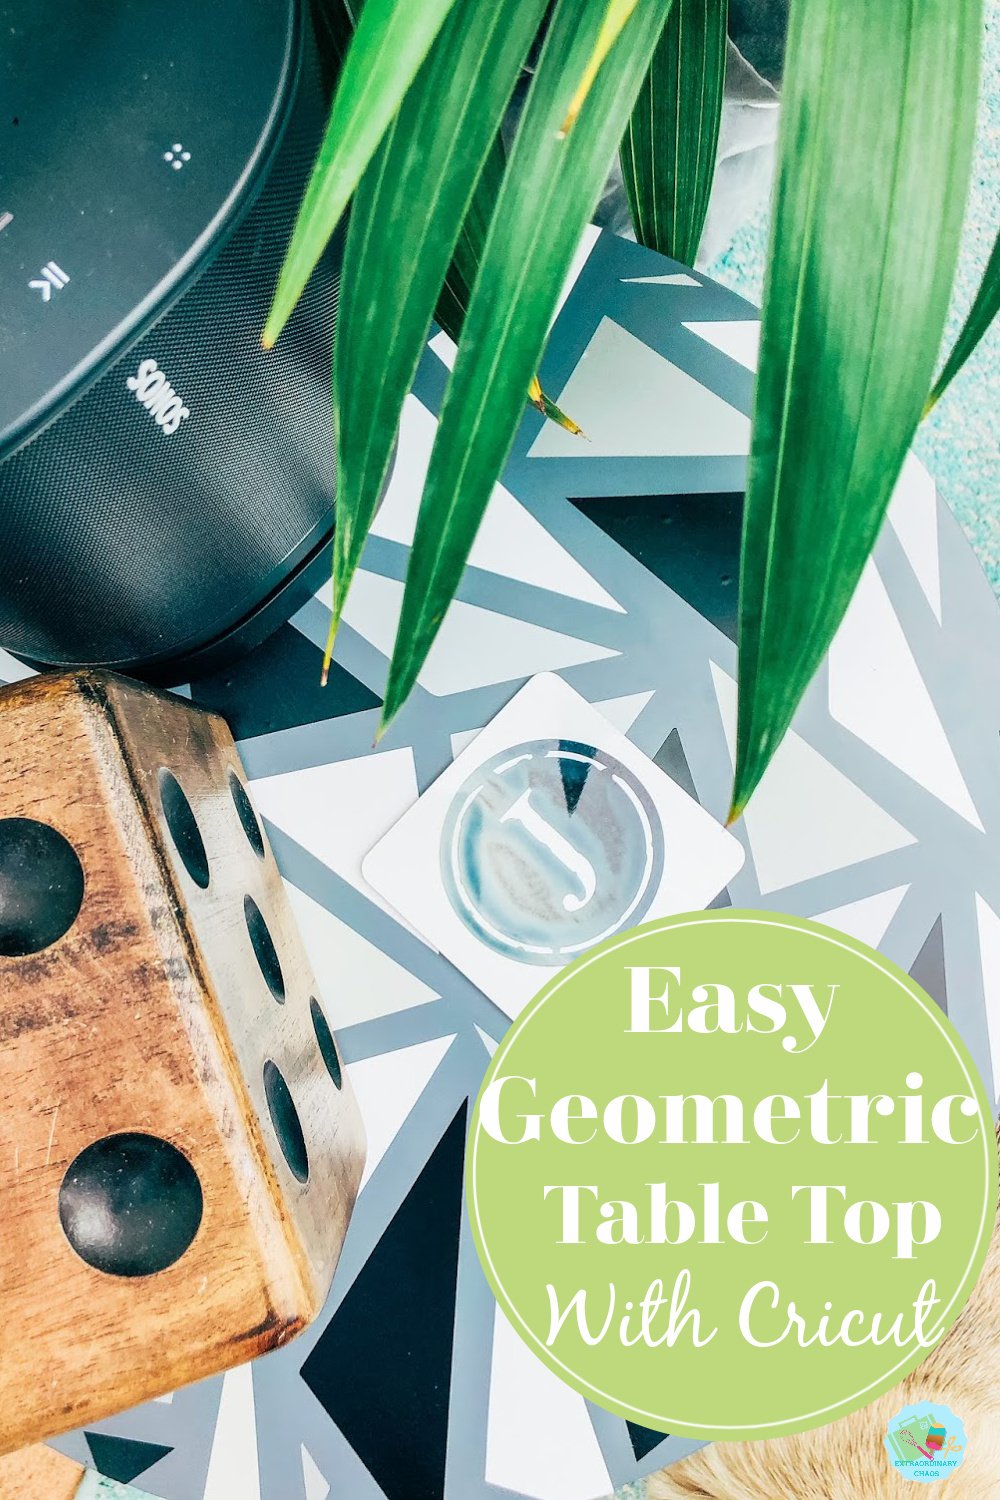 How to make a geometric table top with Cricut